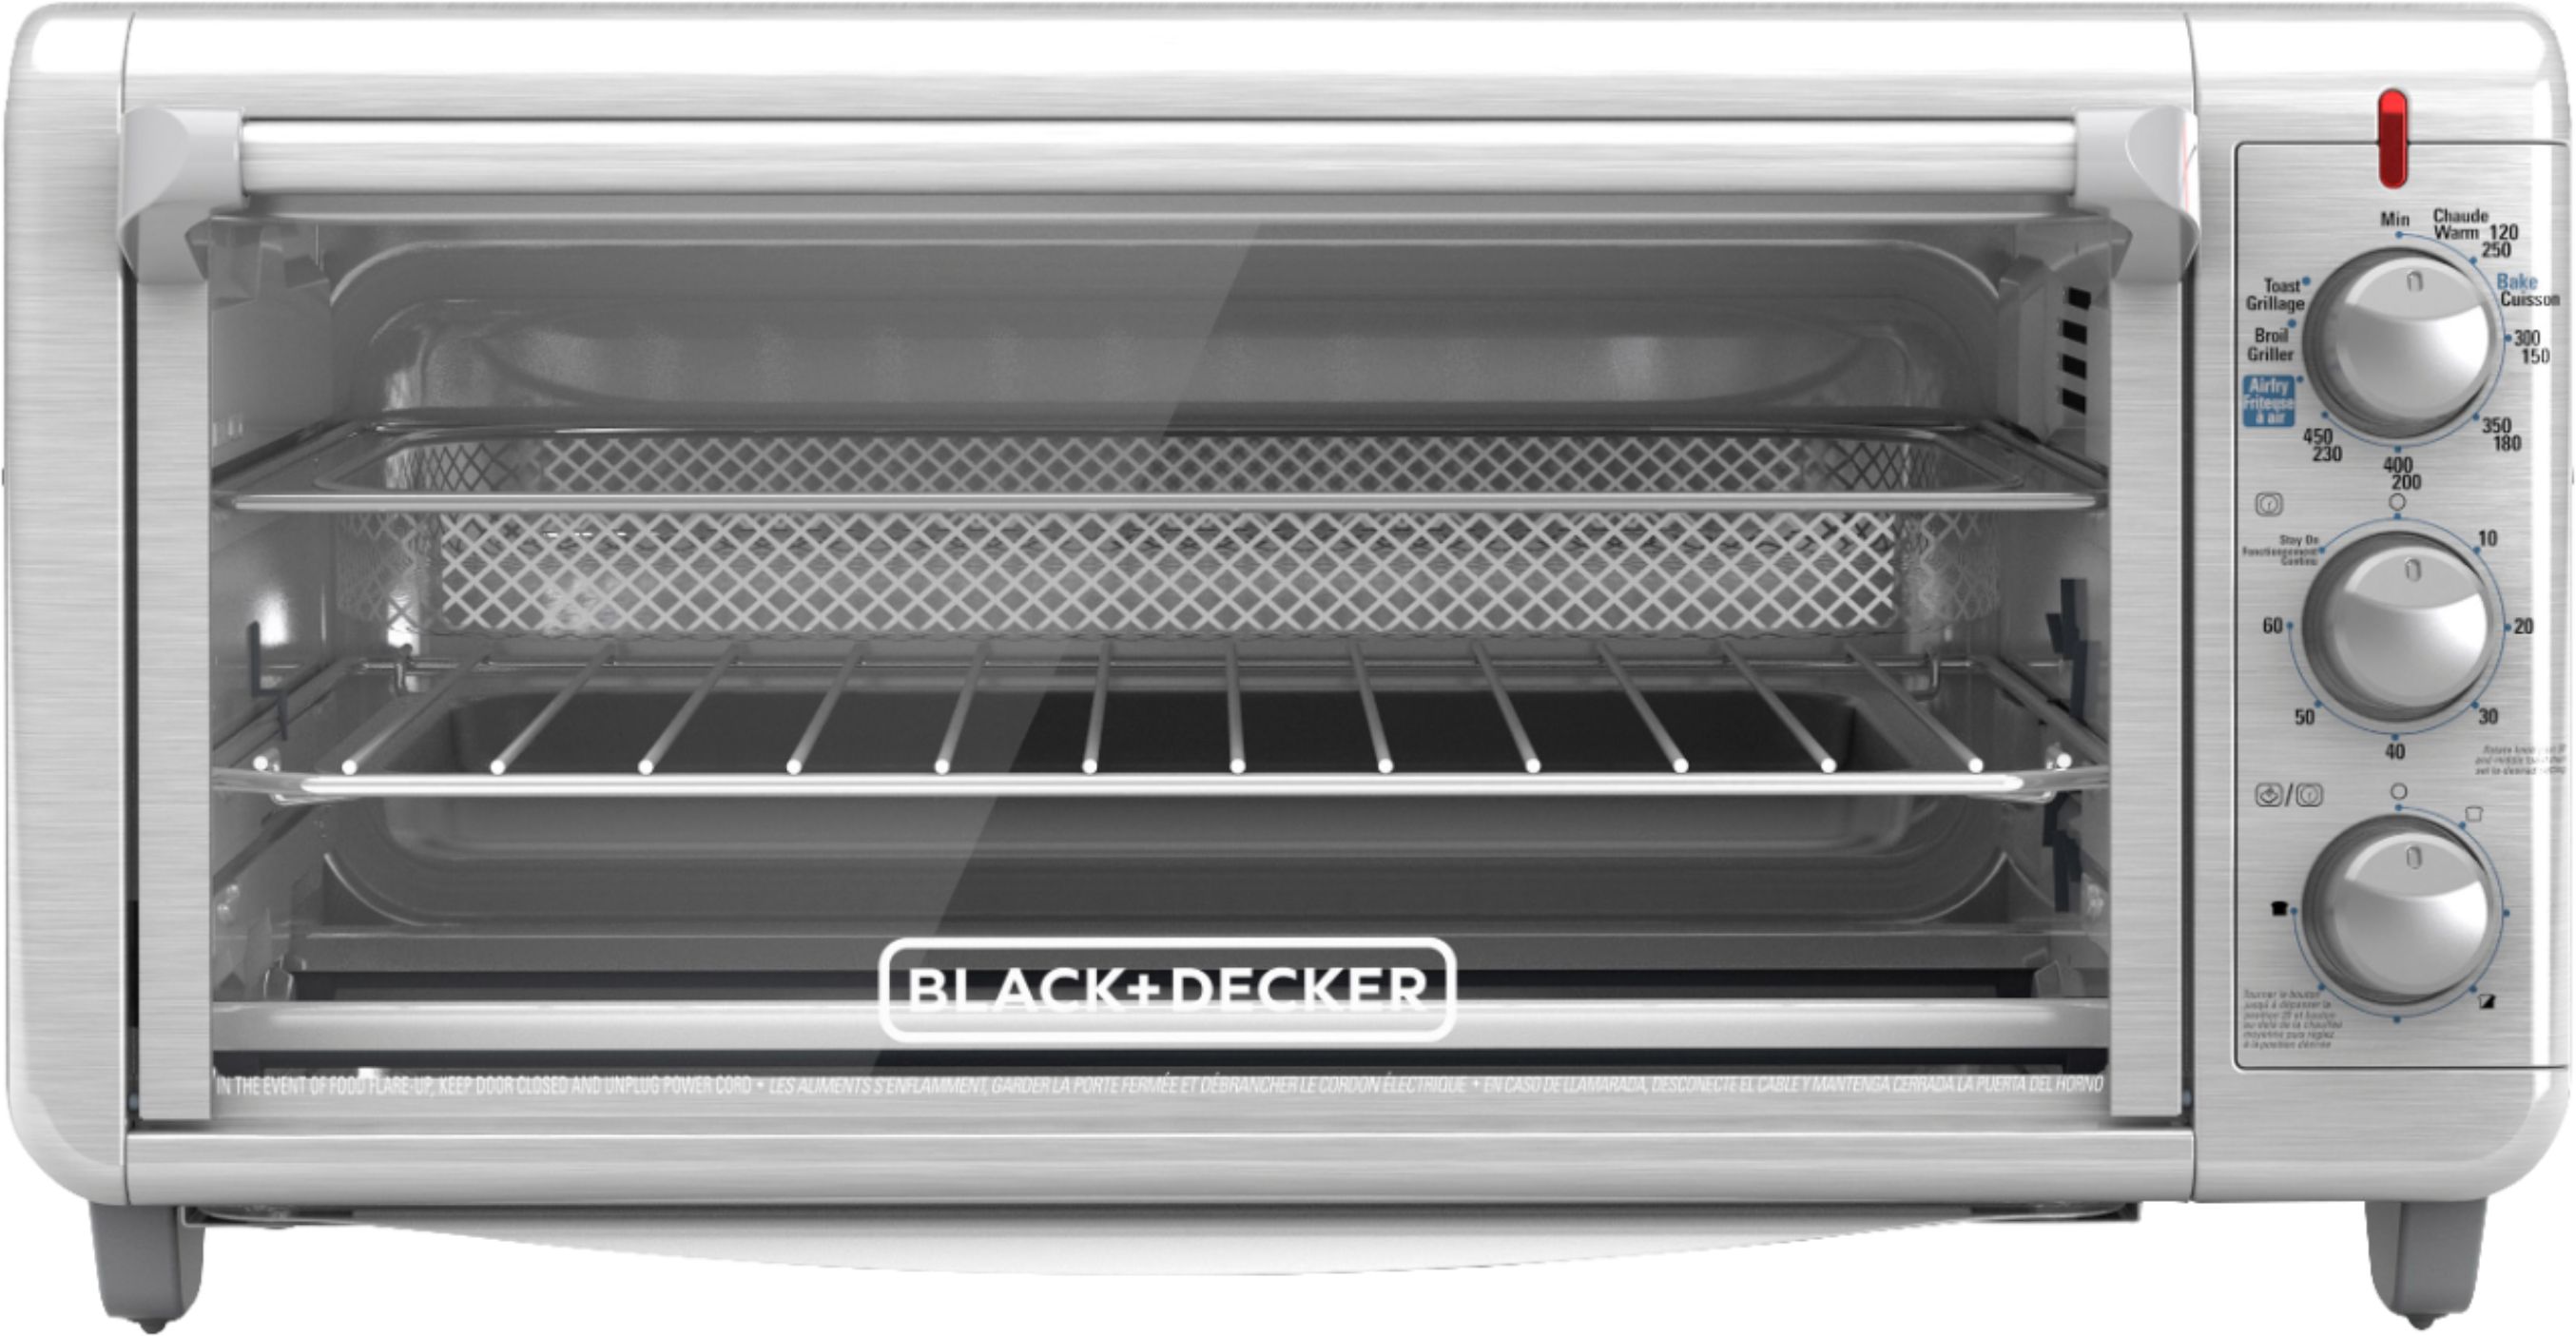 Black And Decker Convection Toaster Oven Parts | All About Image HD